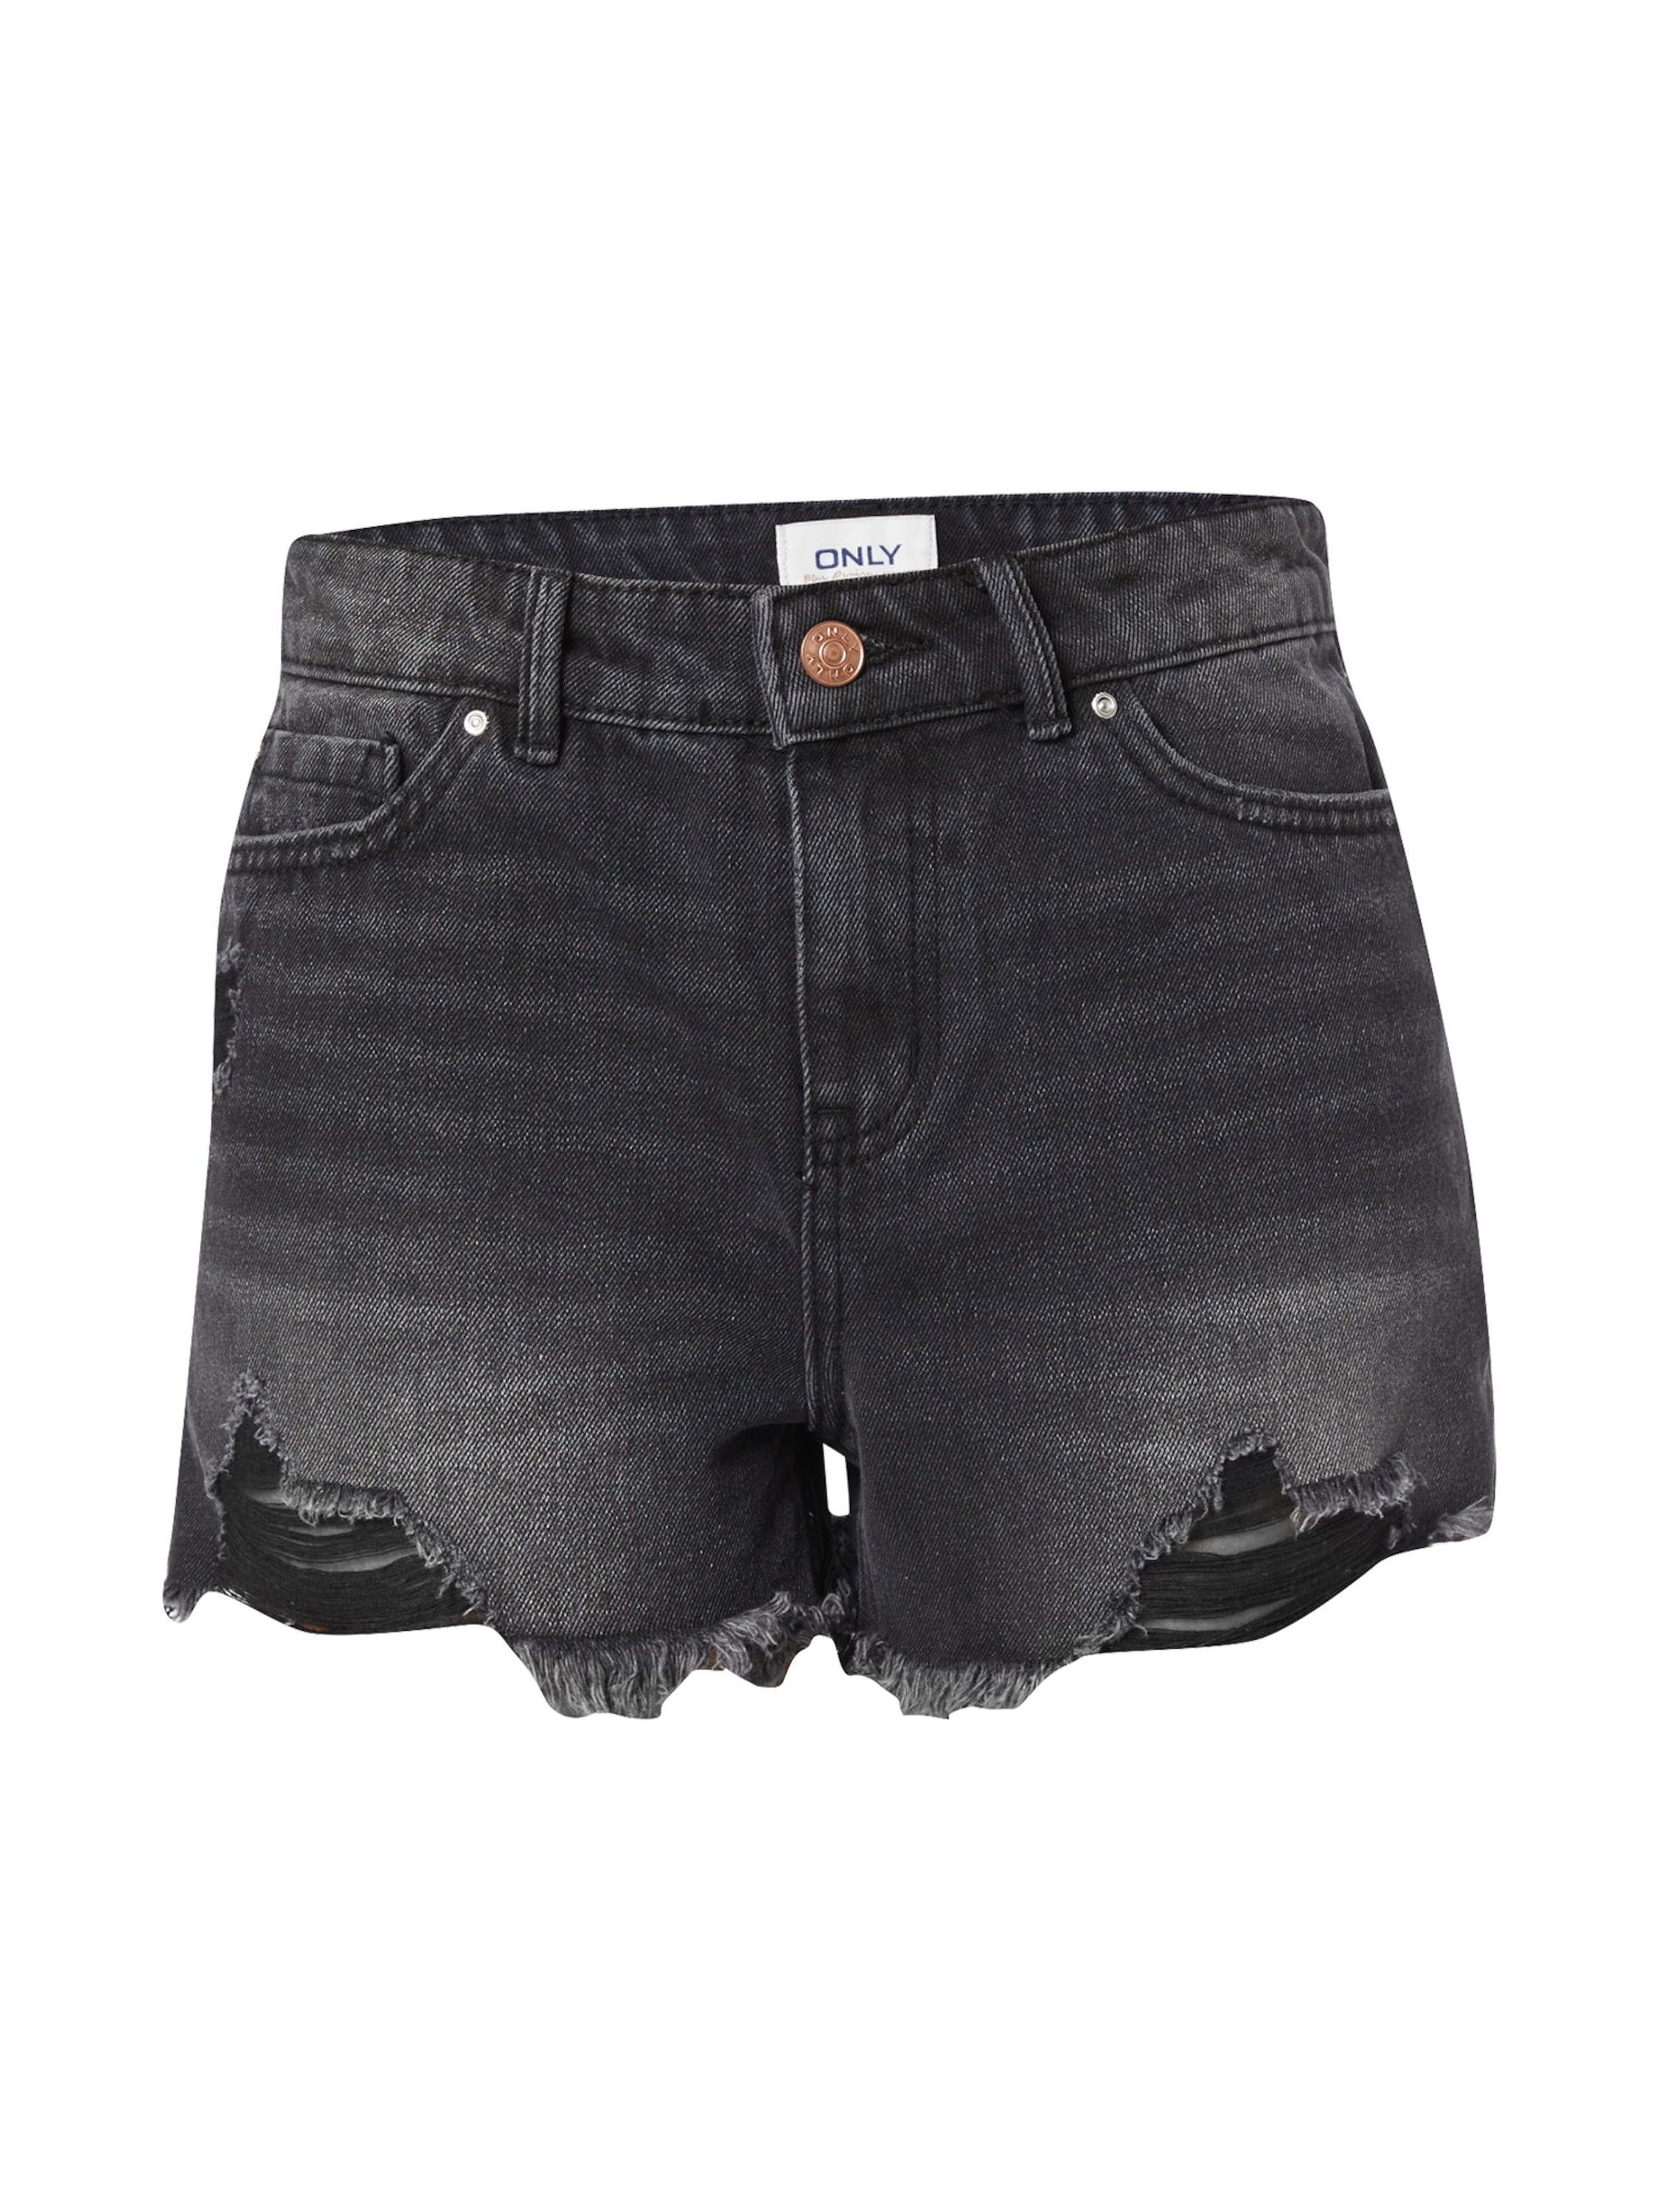 Washed Black (1-tlg) Detail Fransen, ONLY Pacy Jeansshorts Weiteres